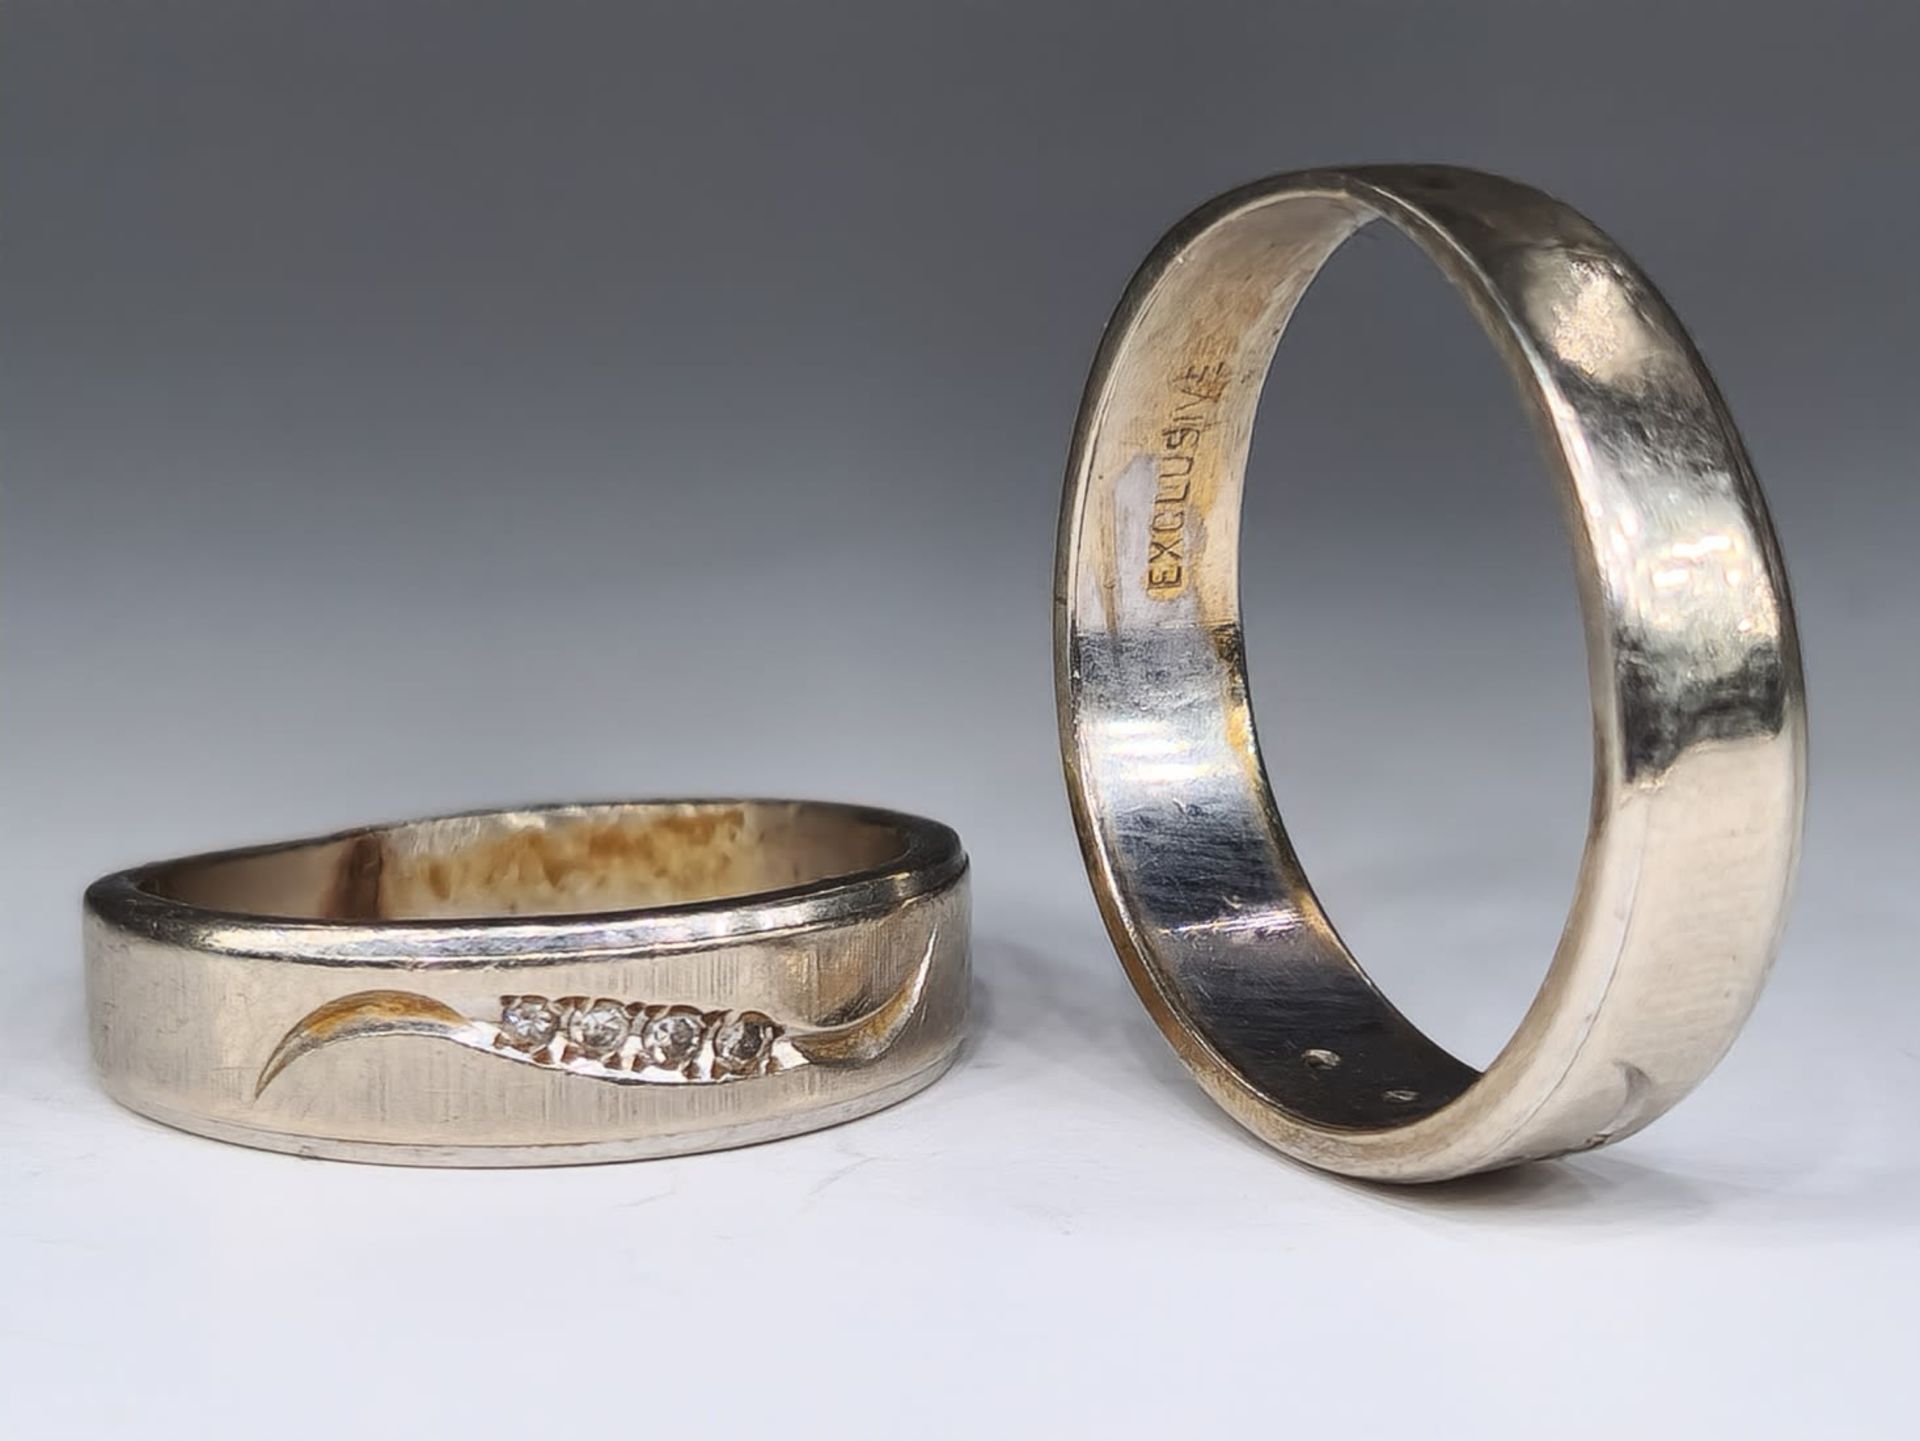 A set of 2 gold rings made of 14K white gold with small diamonds, with a total weight of - Bild 3 aus 6